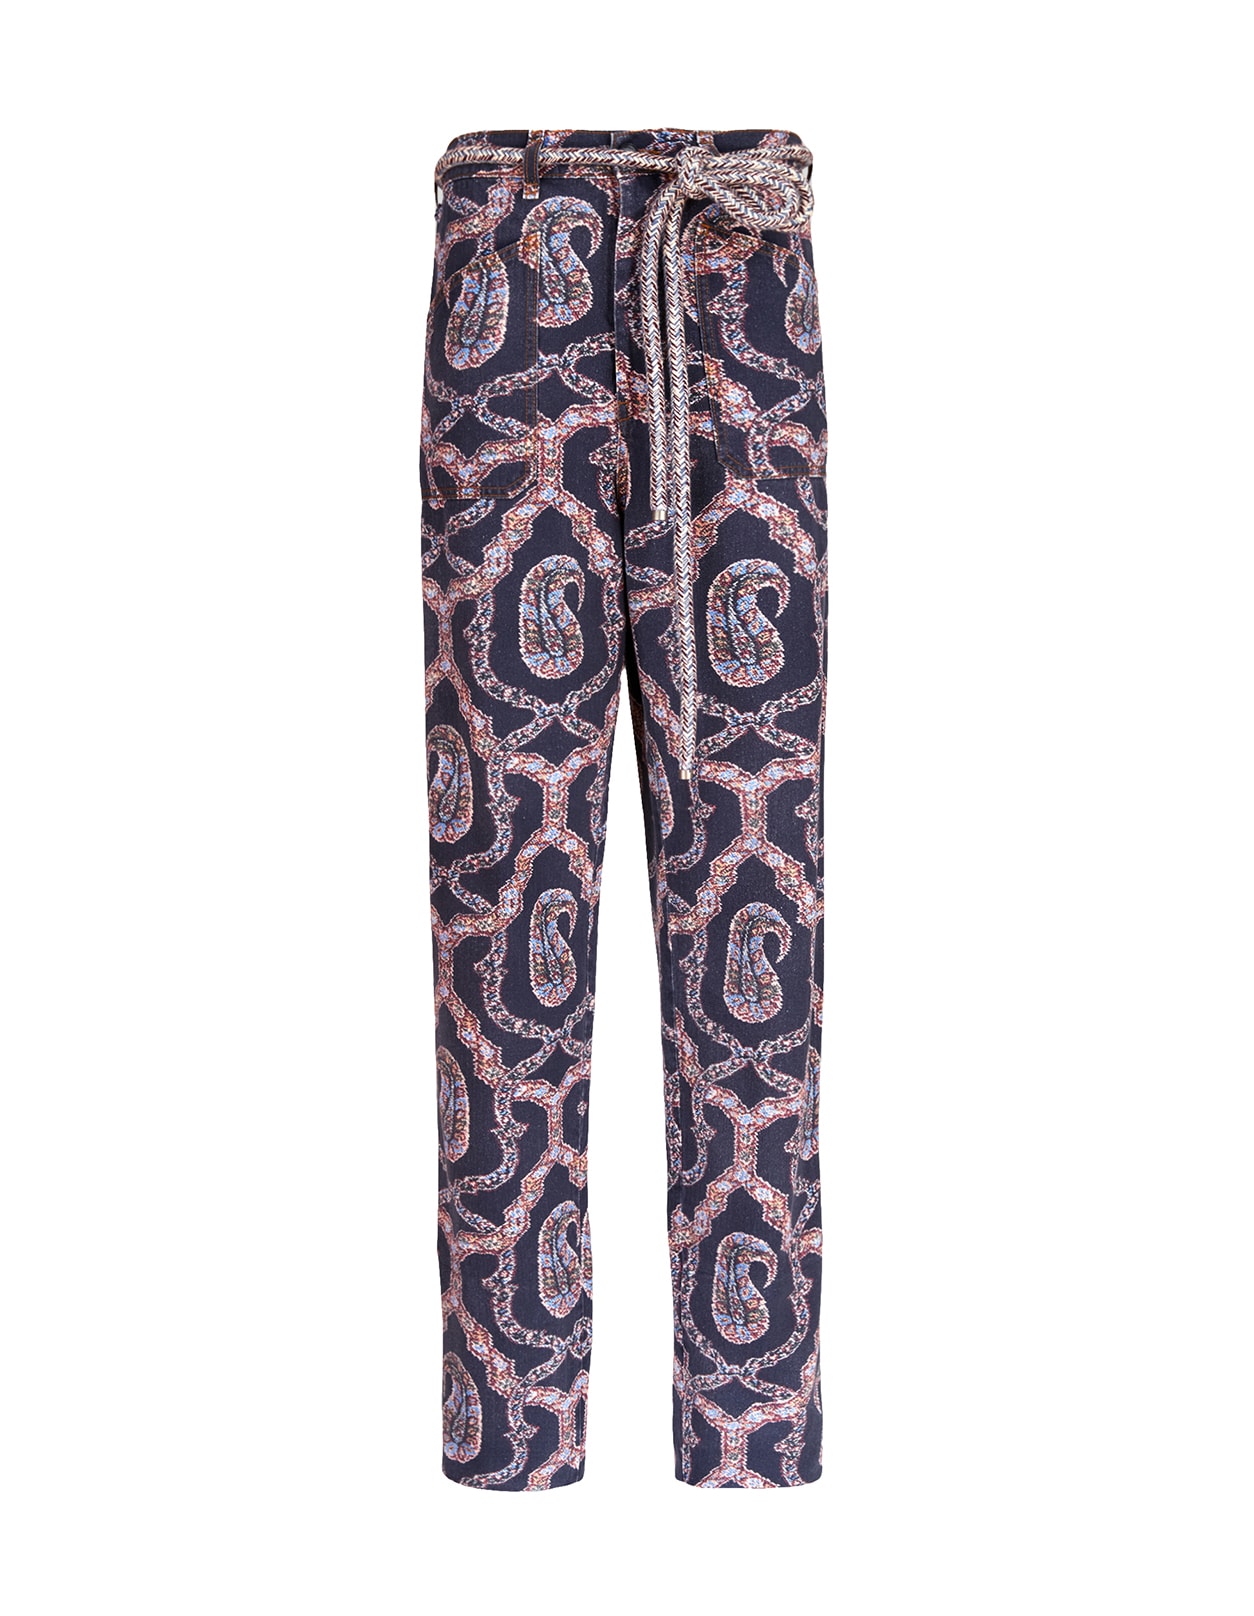 Etro Woman Trousers In Navy Blue Paisley Denim